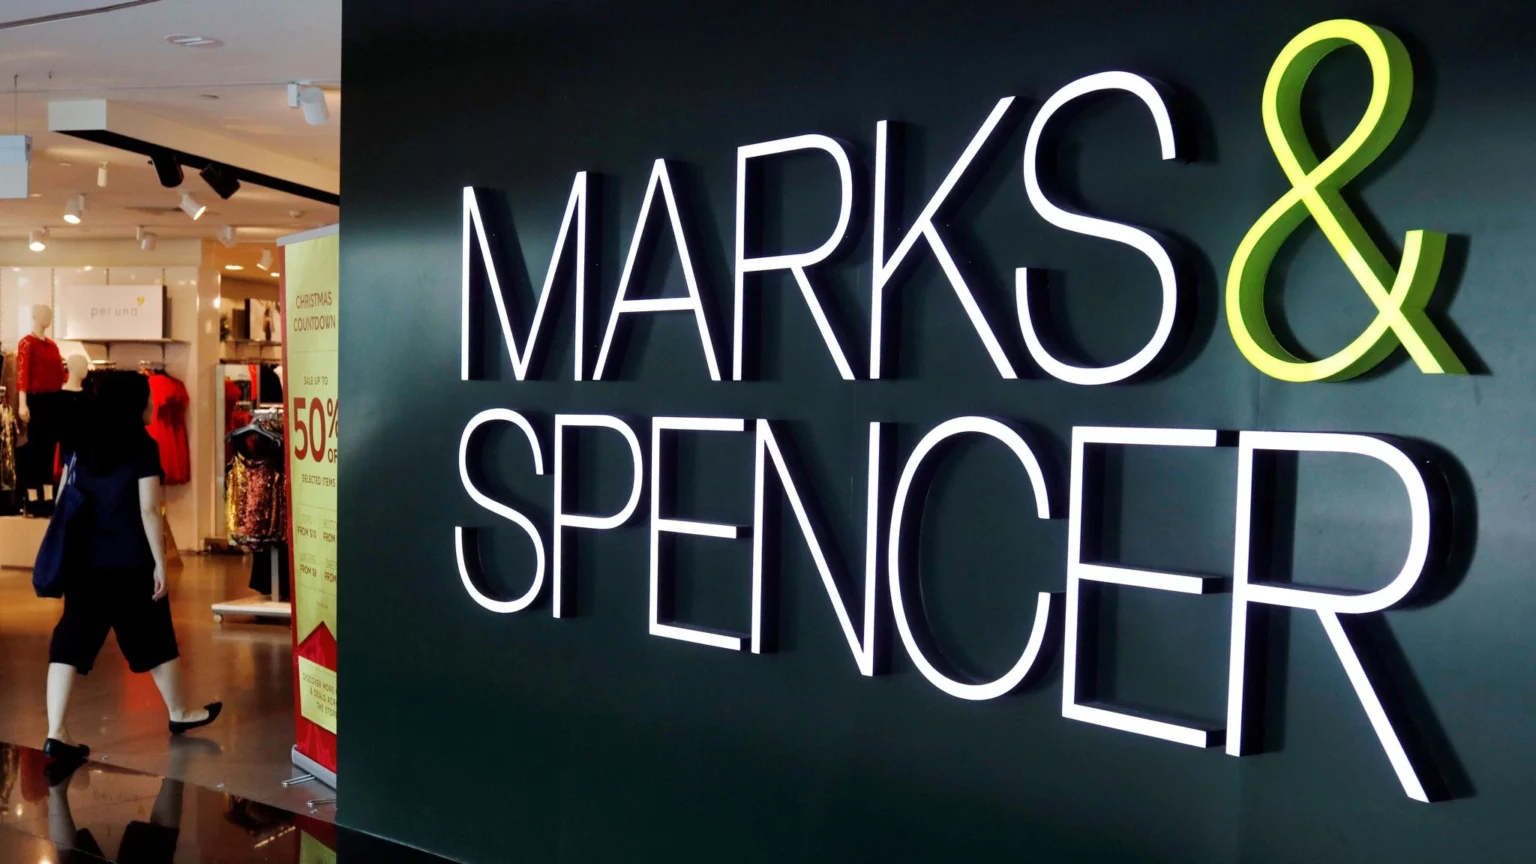 uk-retailer-marks-spencer-expects-revenue-growth-in-the-coming-year